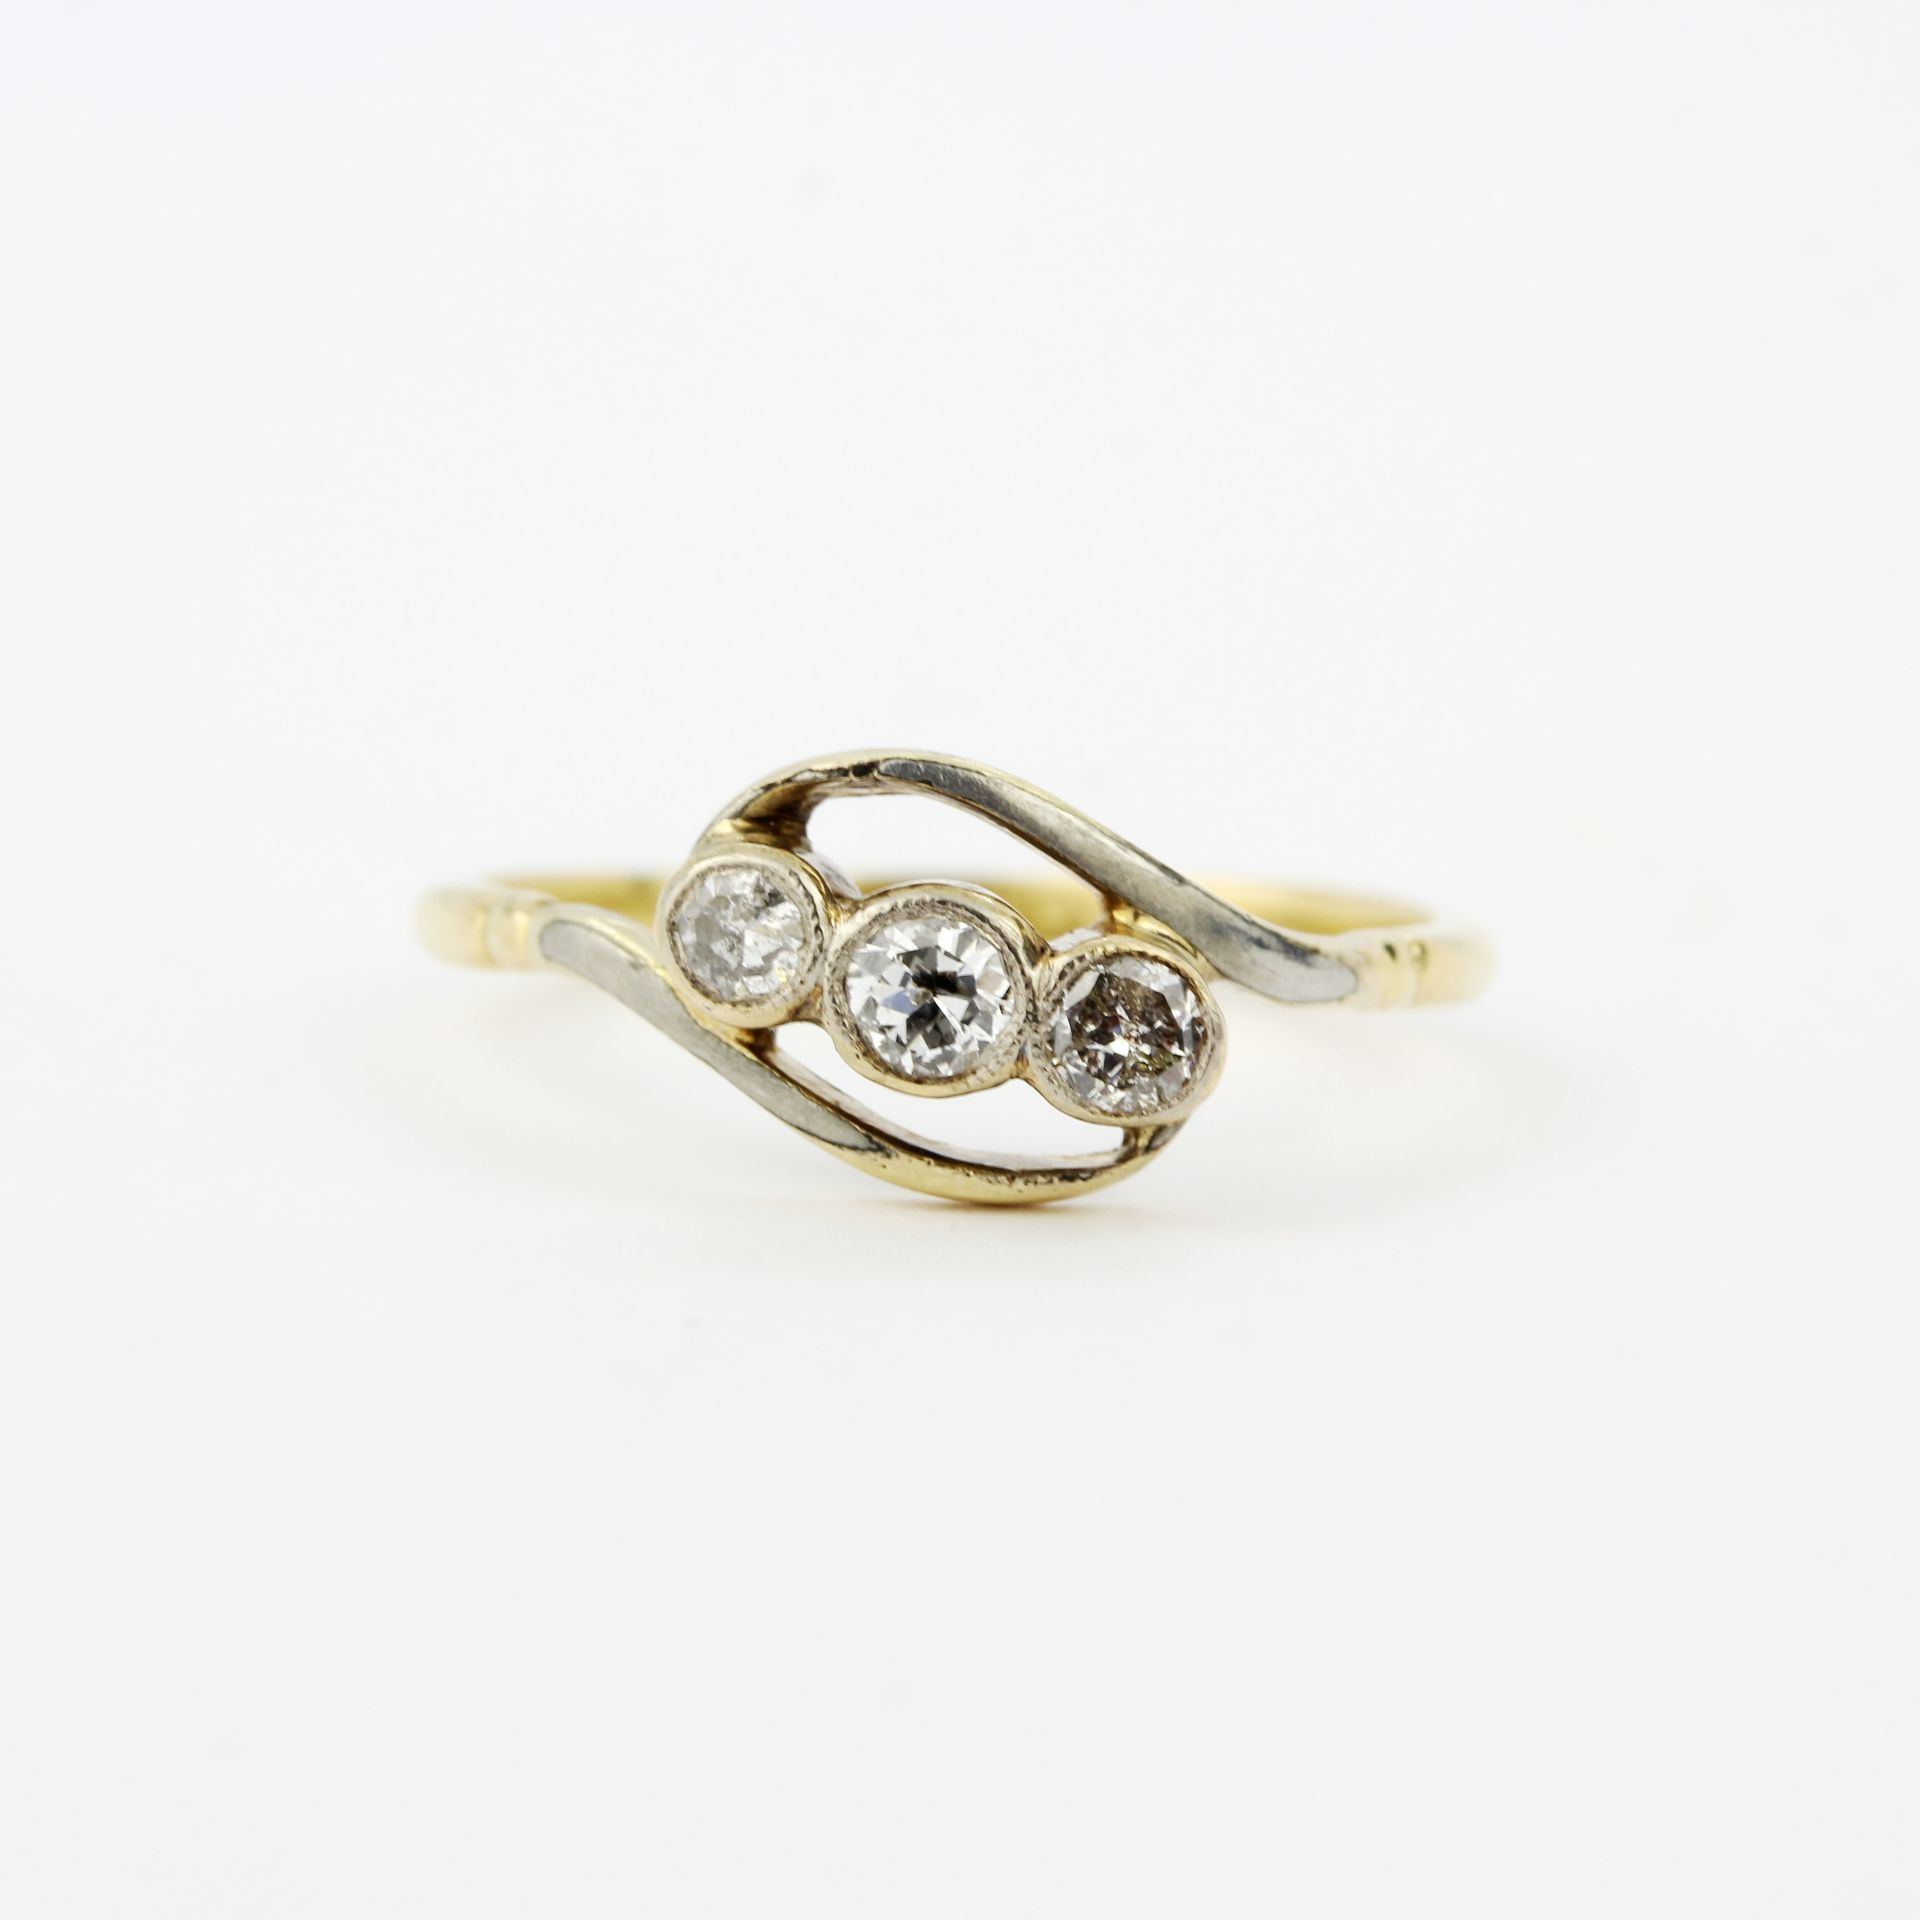 An early 20th century 18ct and platinum crossover ring set with three brilliant cut diamonds, ring - Image 2 of 3